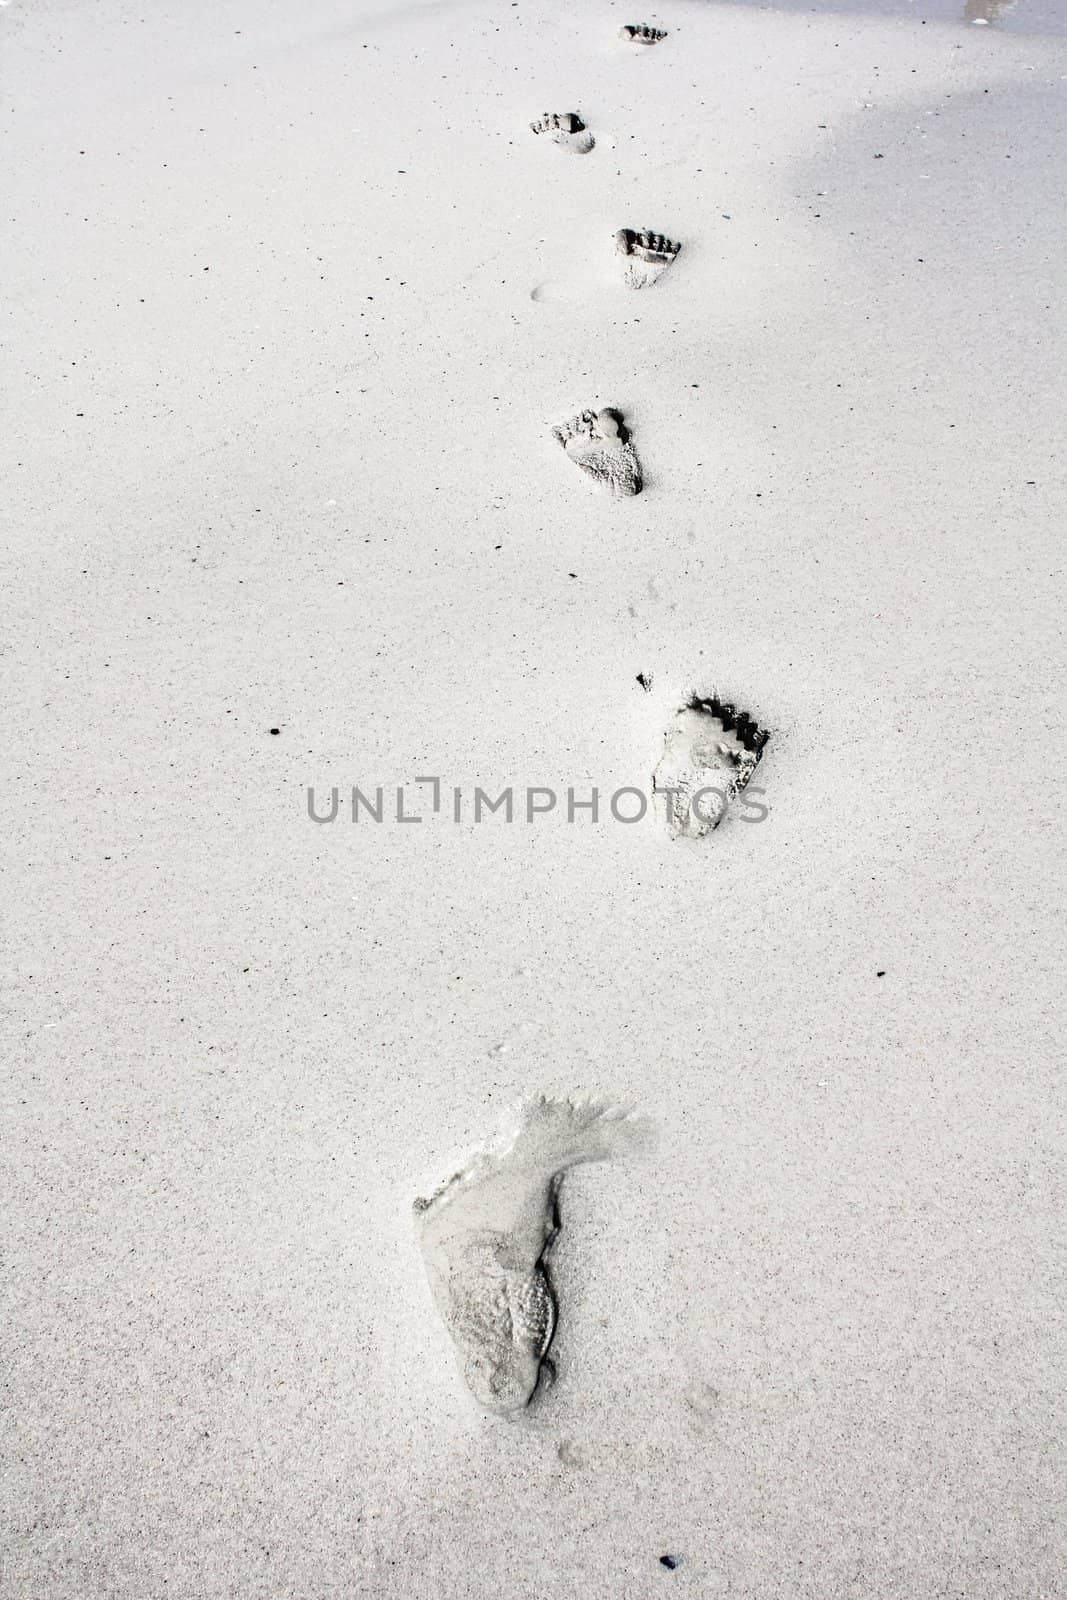 Footsteps in the sand by dwaschnig_photo